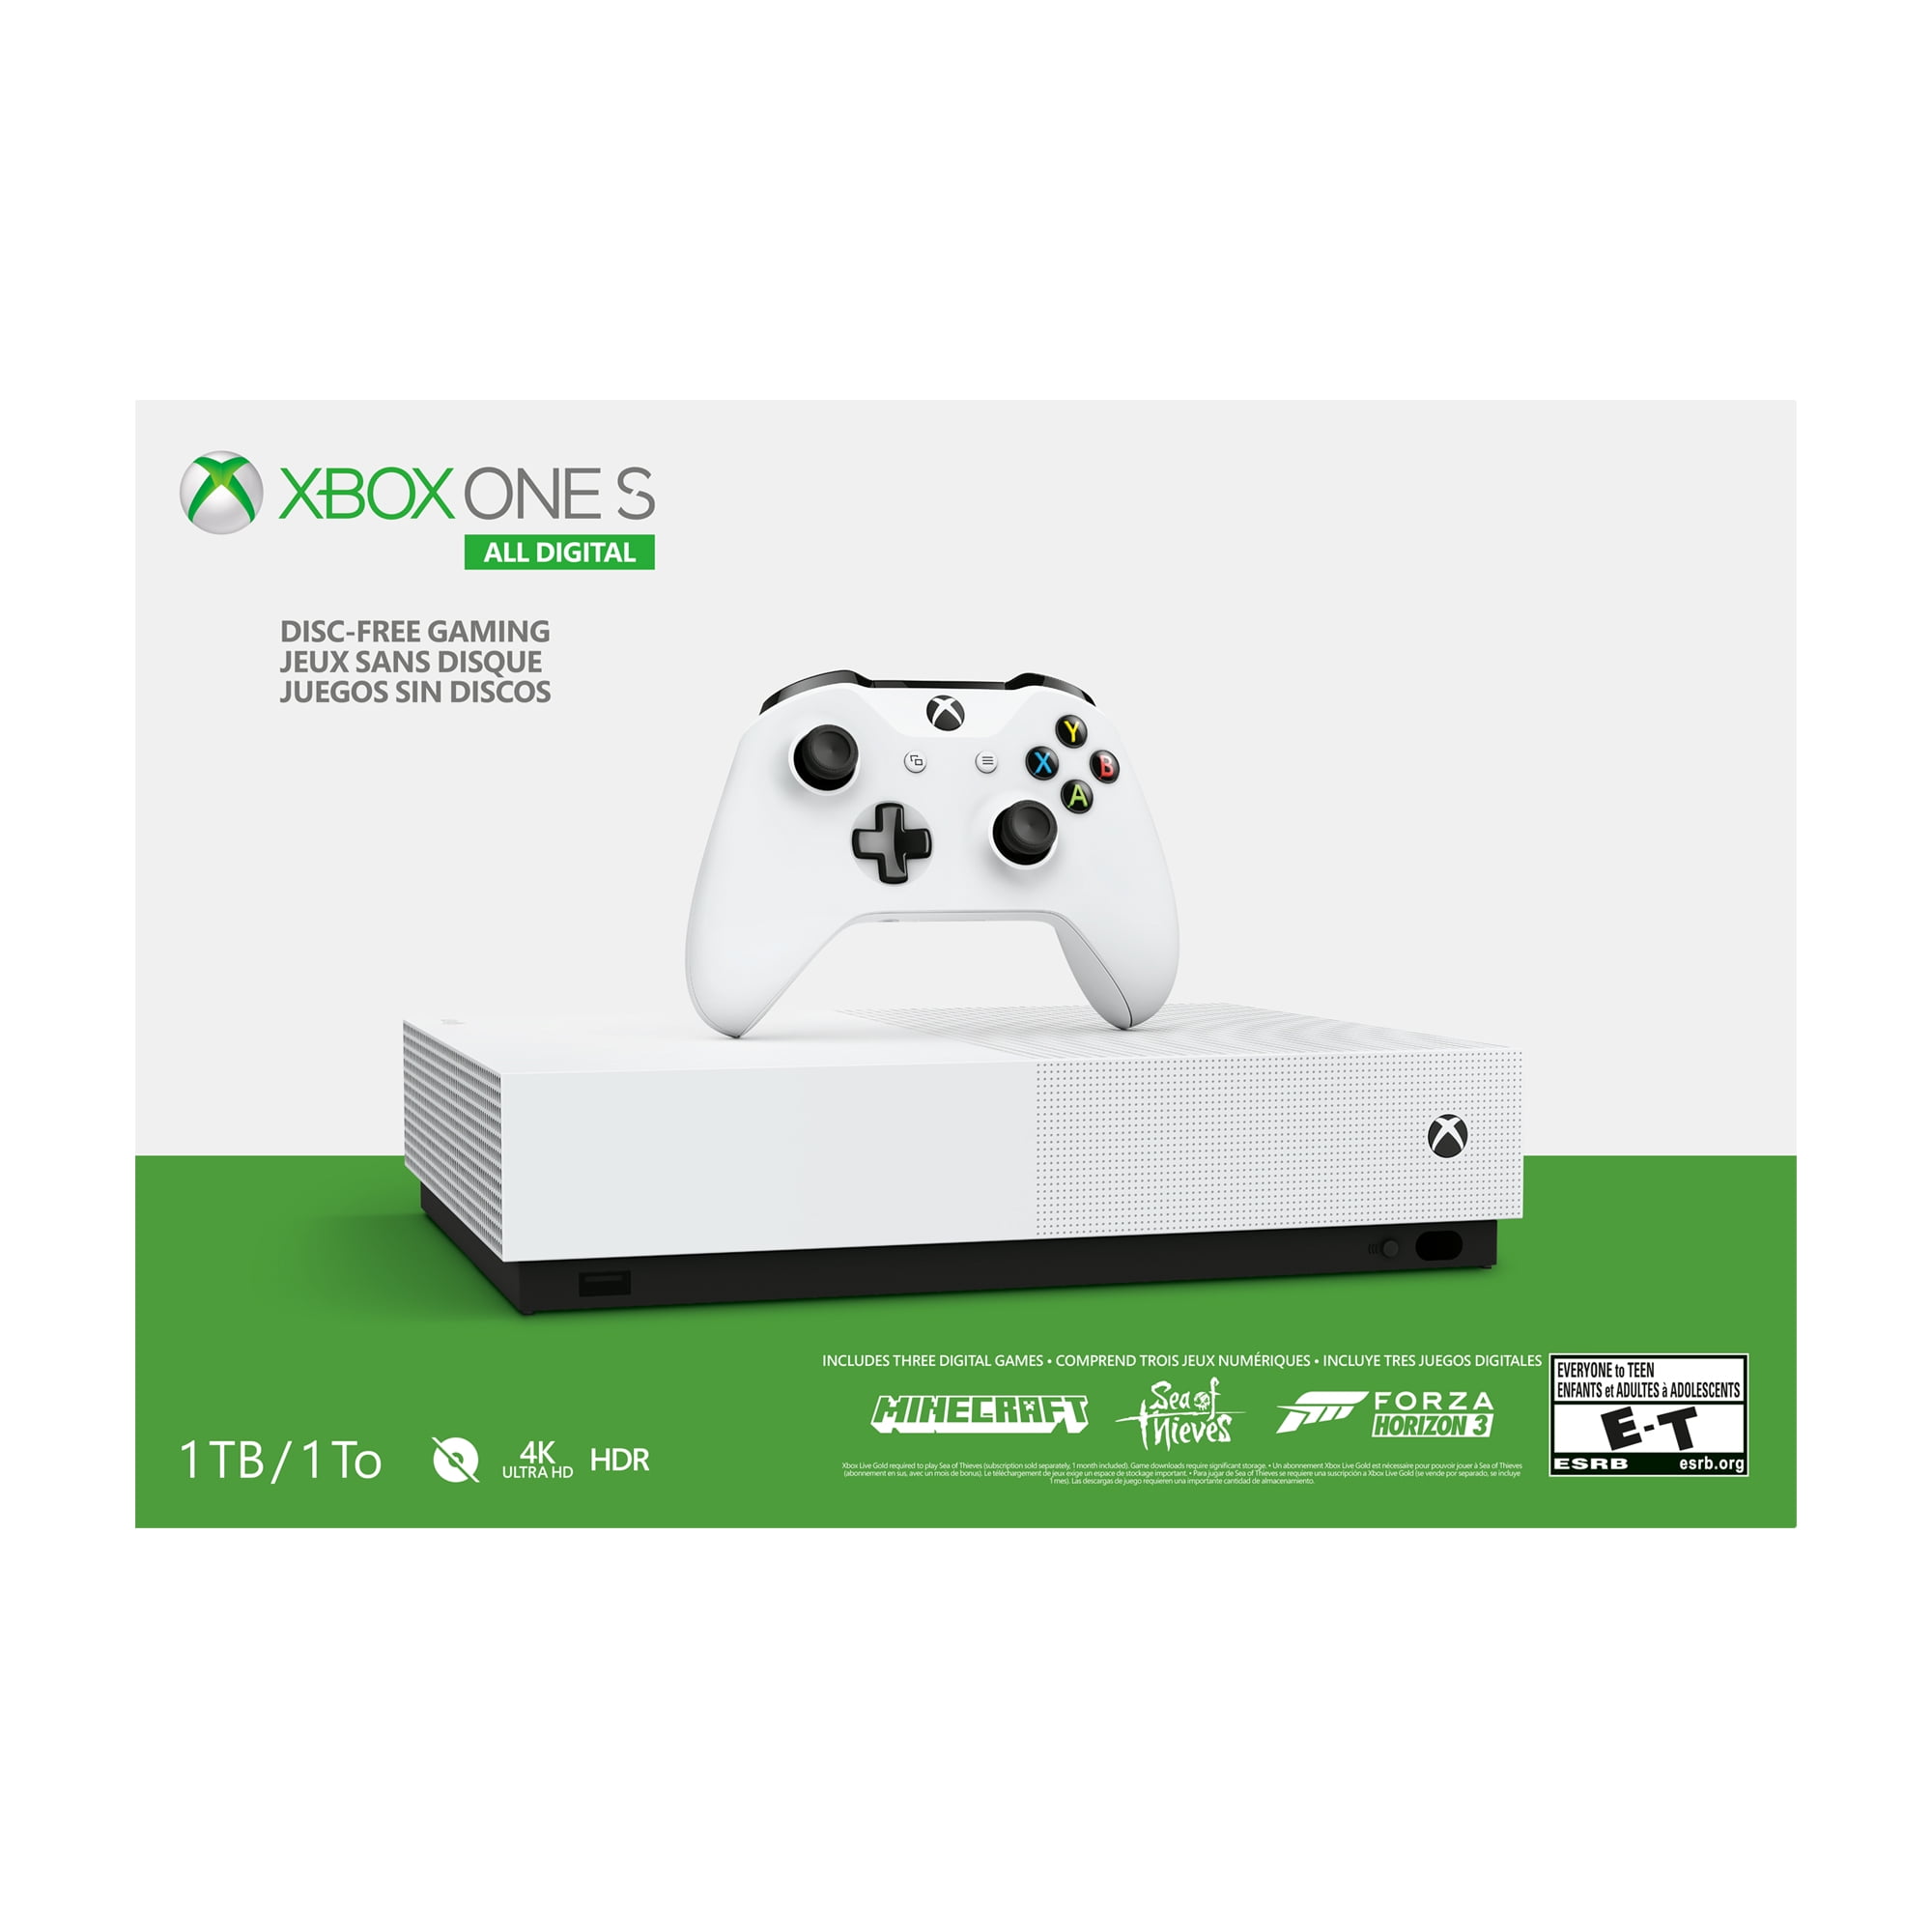 Defilé waterval Stap Microsoft Xbox One S 1TB All-Digital Edition Console (Disc-free Gaming),  White, NJP-00024 - Walmart.com